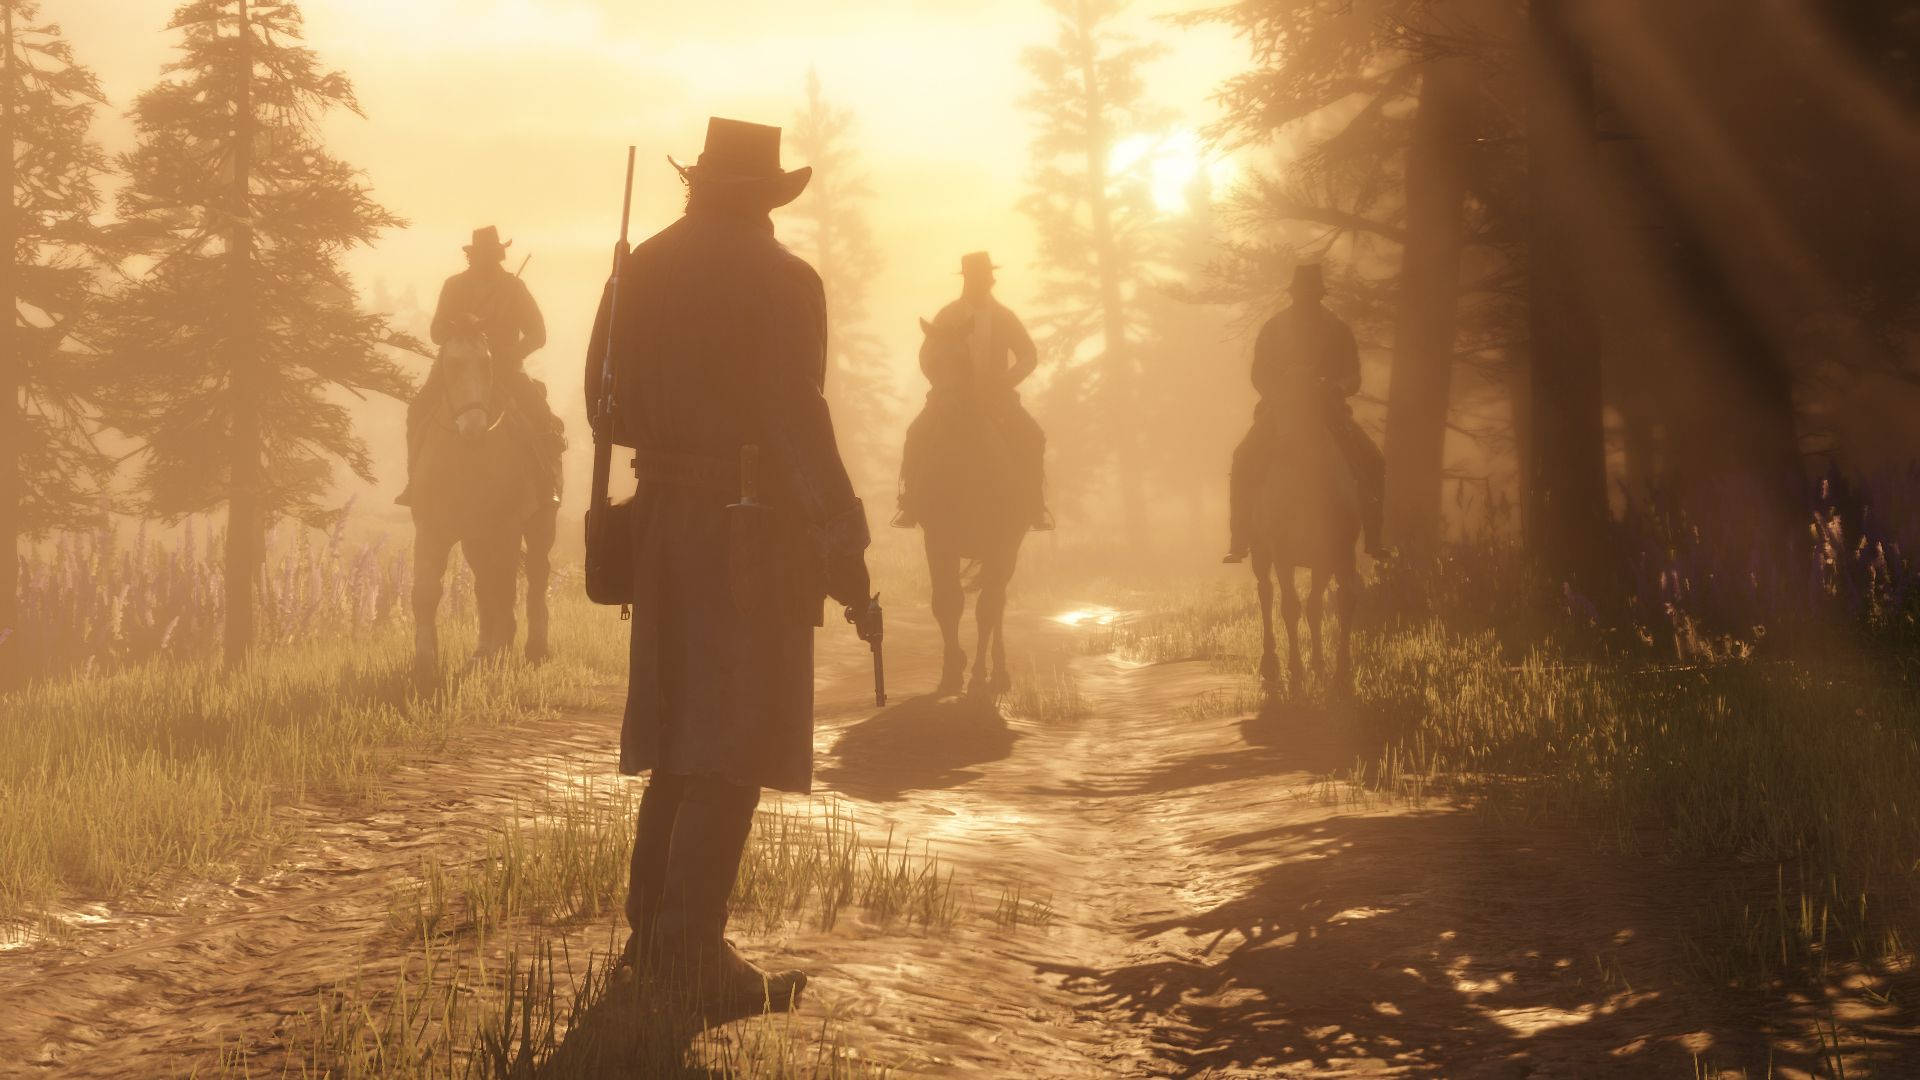 Red Dead Redemption 2 Backgrounds